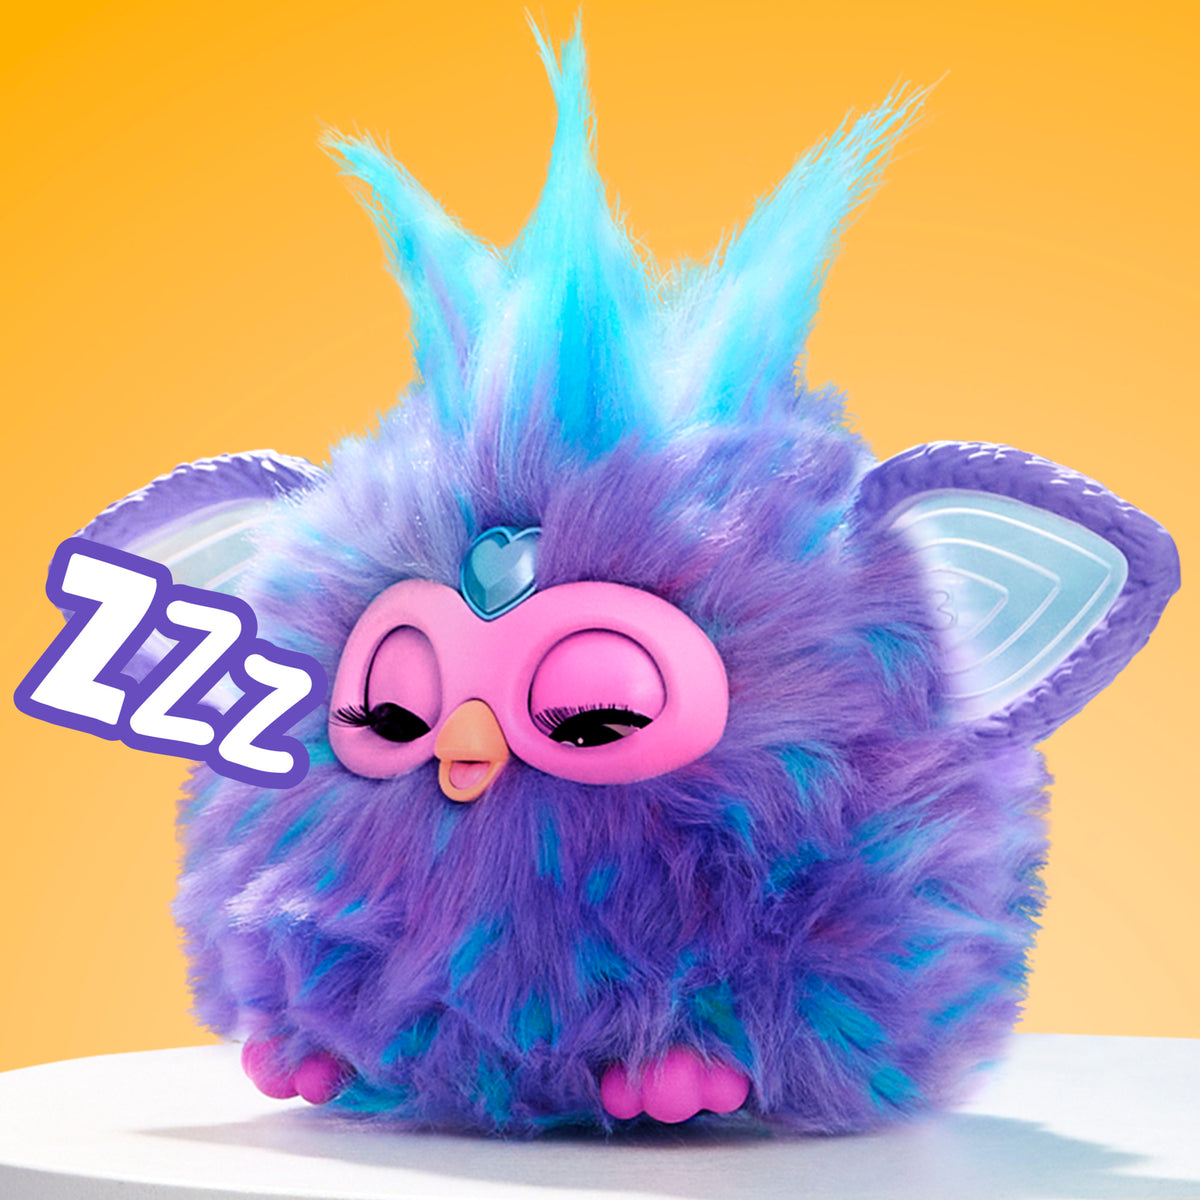 Furby violet Hasbro : King Jouet, Peluches interactives Hasbro - Peluches